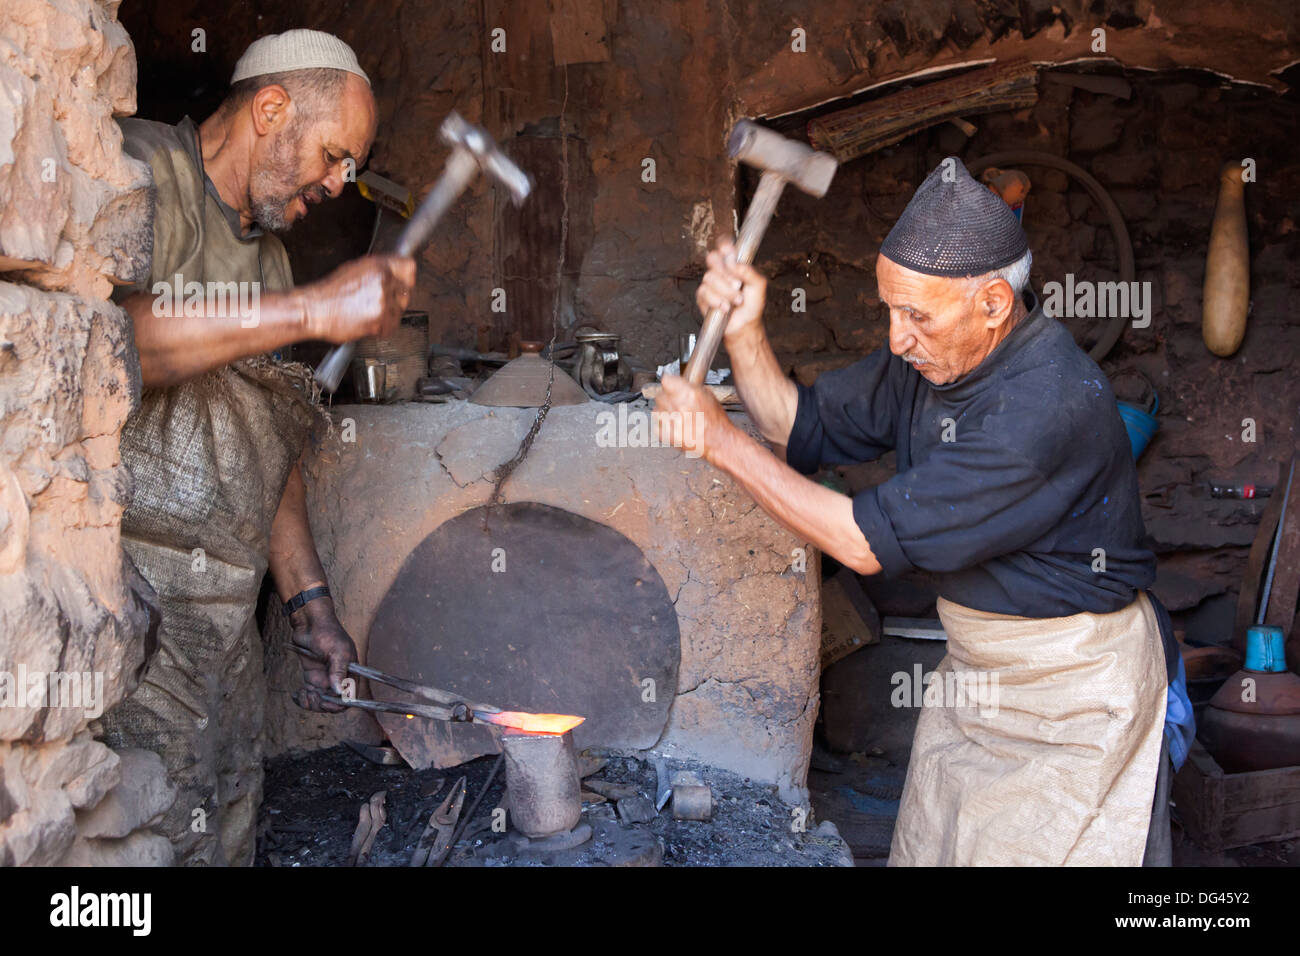 Blacksmiths workshop at the Monday Berber market, Tnine Ourika, Ourika Valley, Atlas Mountains, Morocco, North Africa, Africa Stock Photo